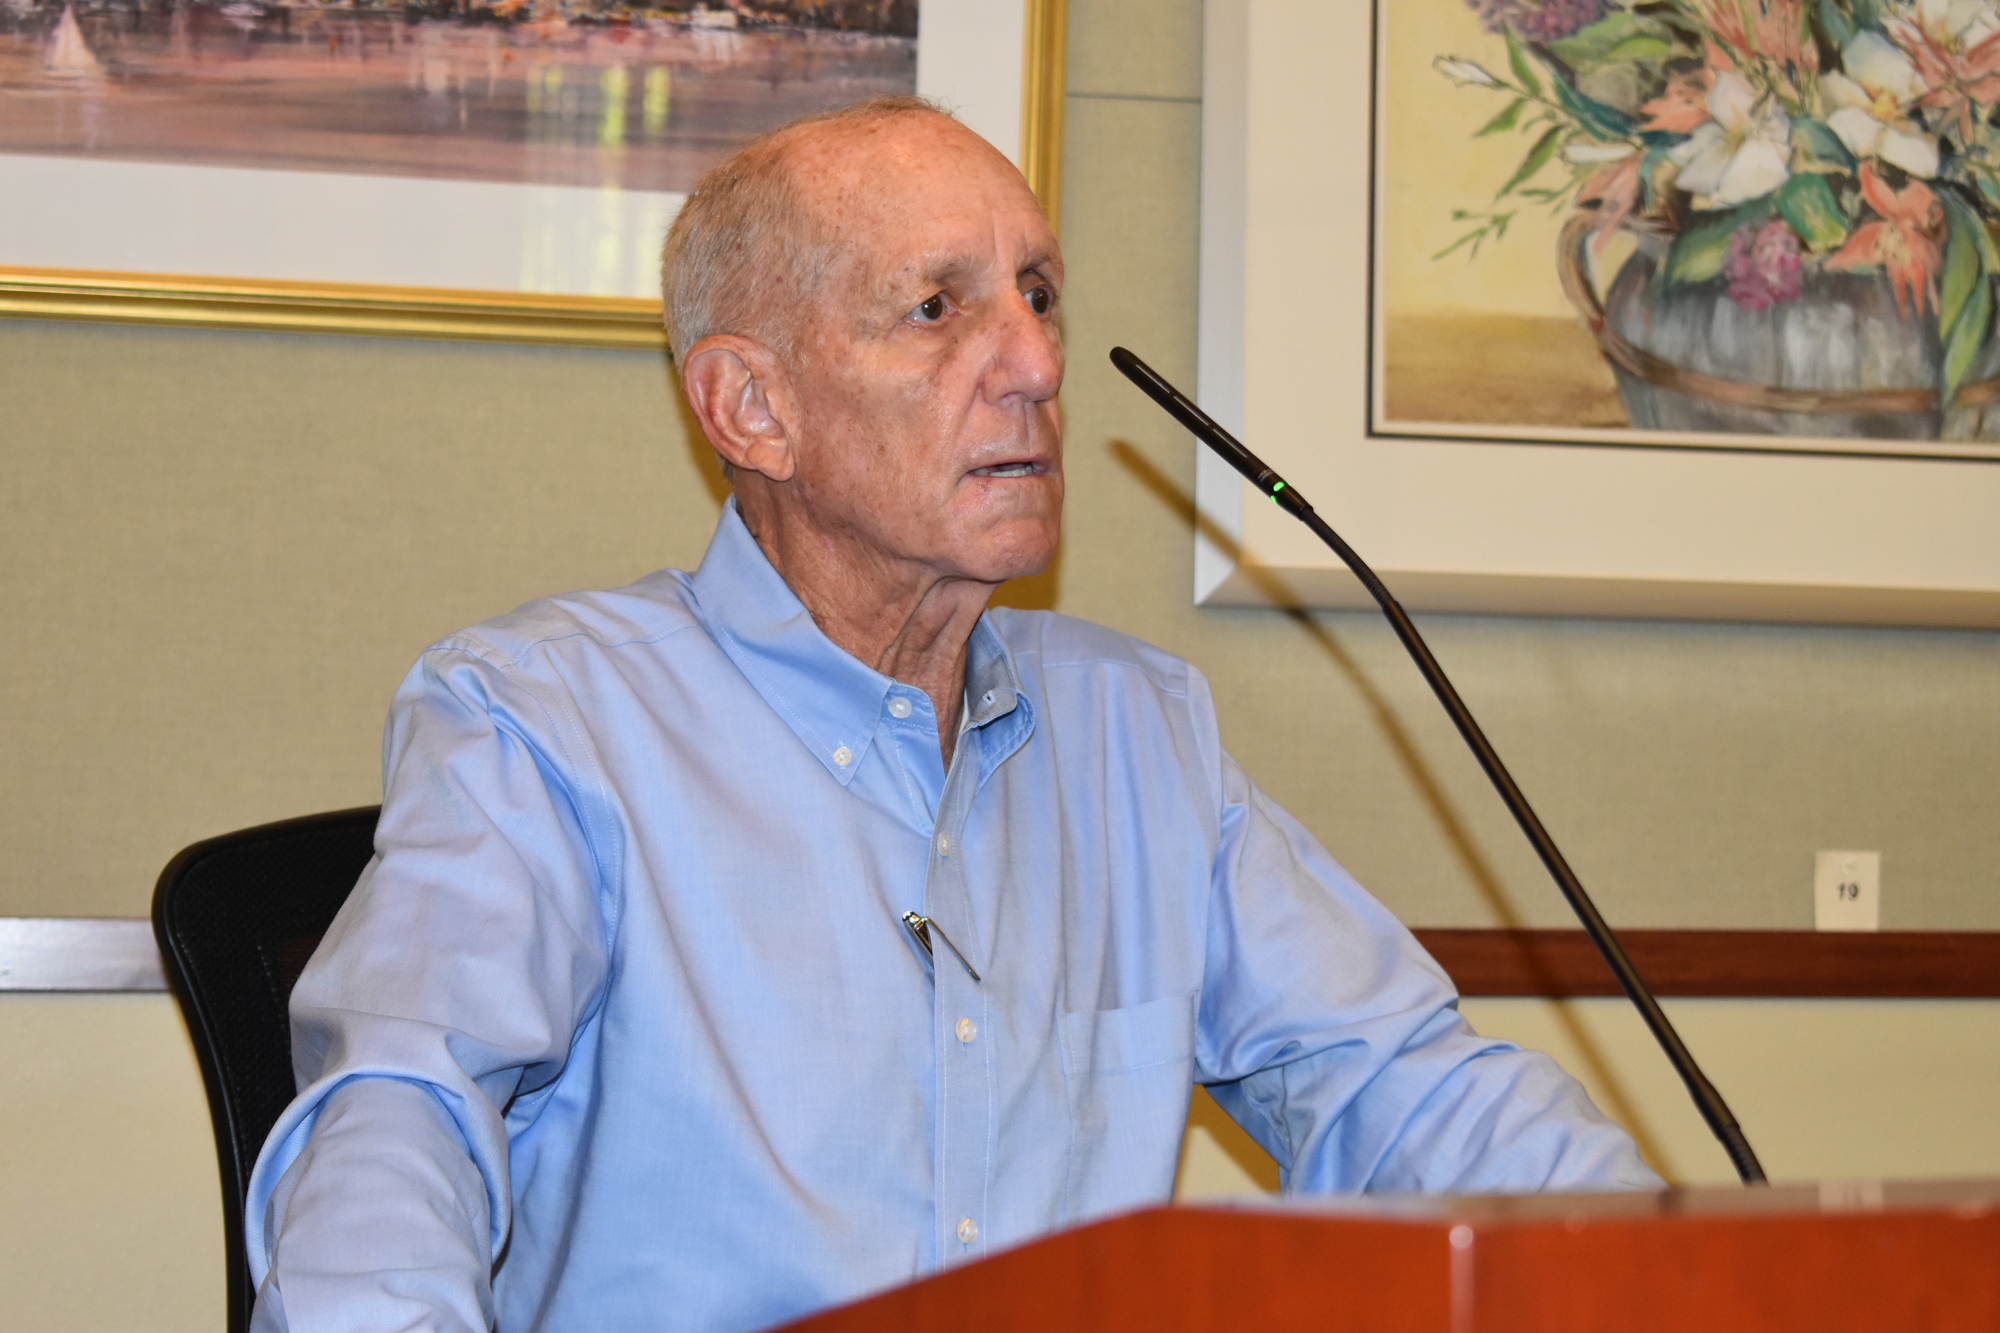 Michael Warnstedt is one of three new members of the Longboat Key Planning and Zoning Board.